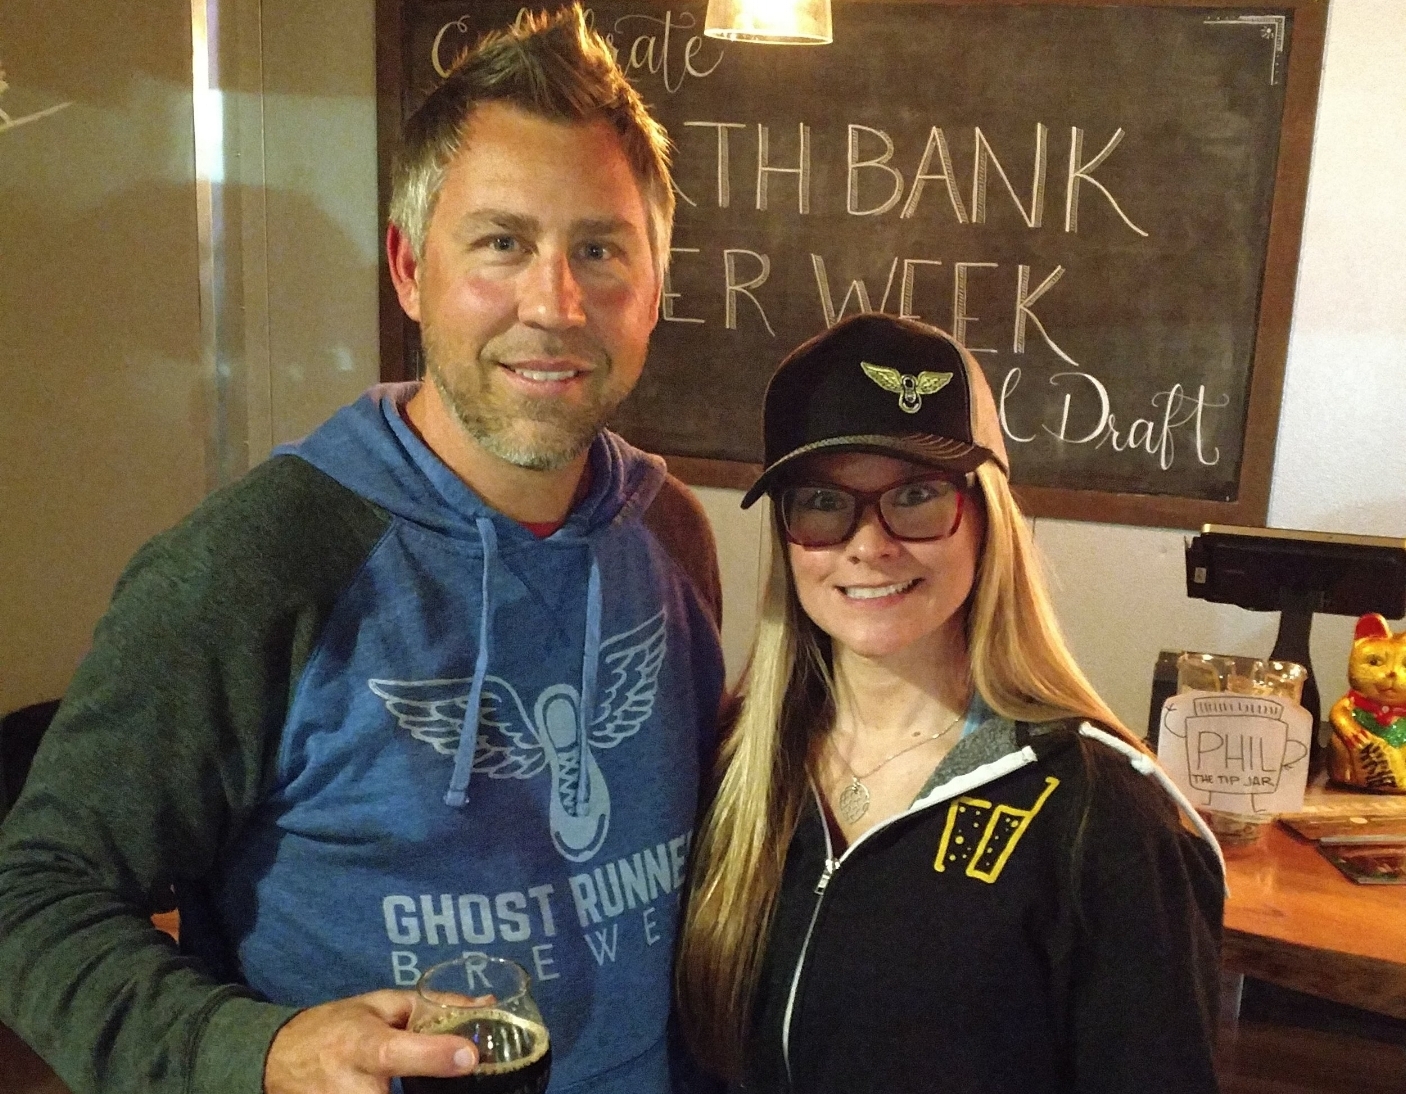 Brewers' Stories - Jeff from Ghost Runners Brewery